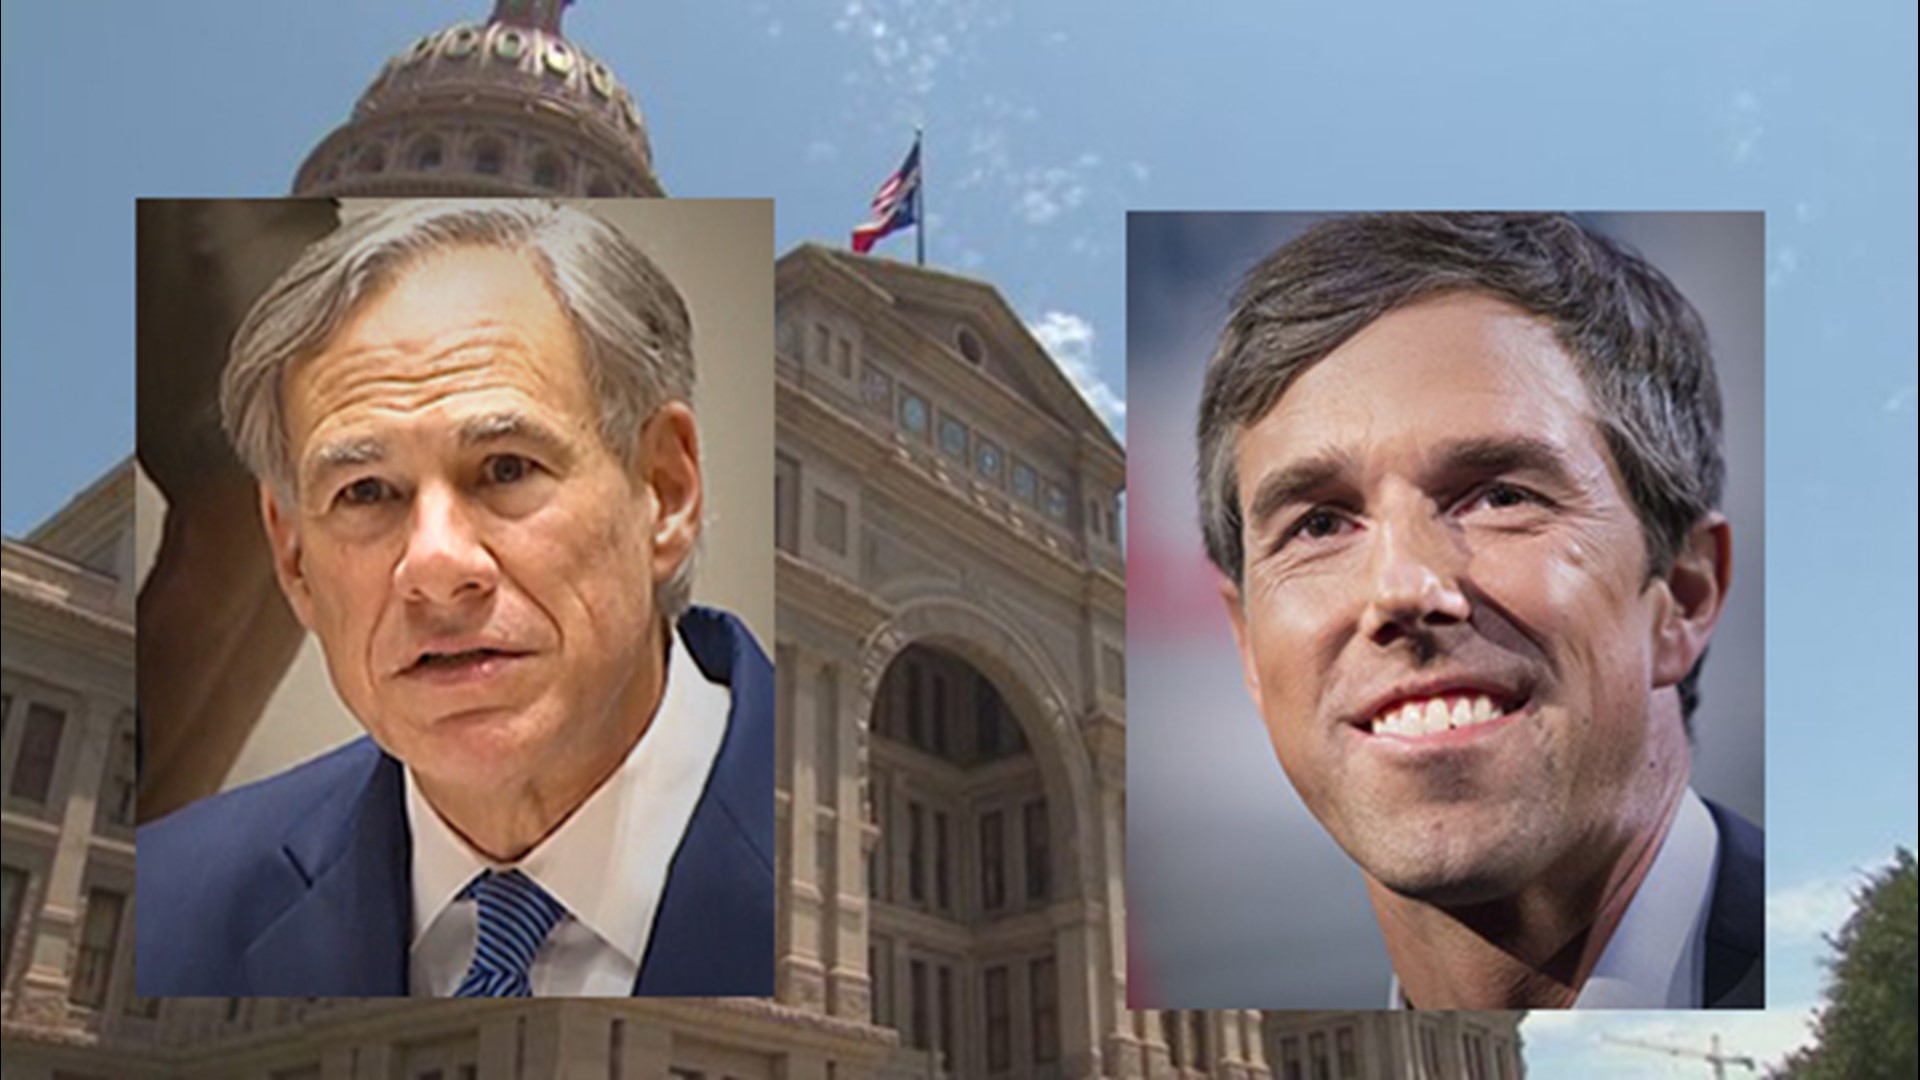 Abbott held an event in Georgetown and O'Rourke met with several Texas mayors on Thursday.